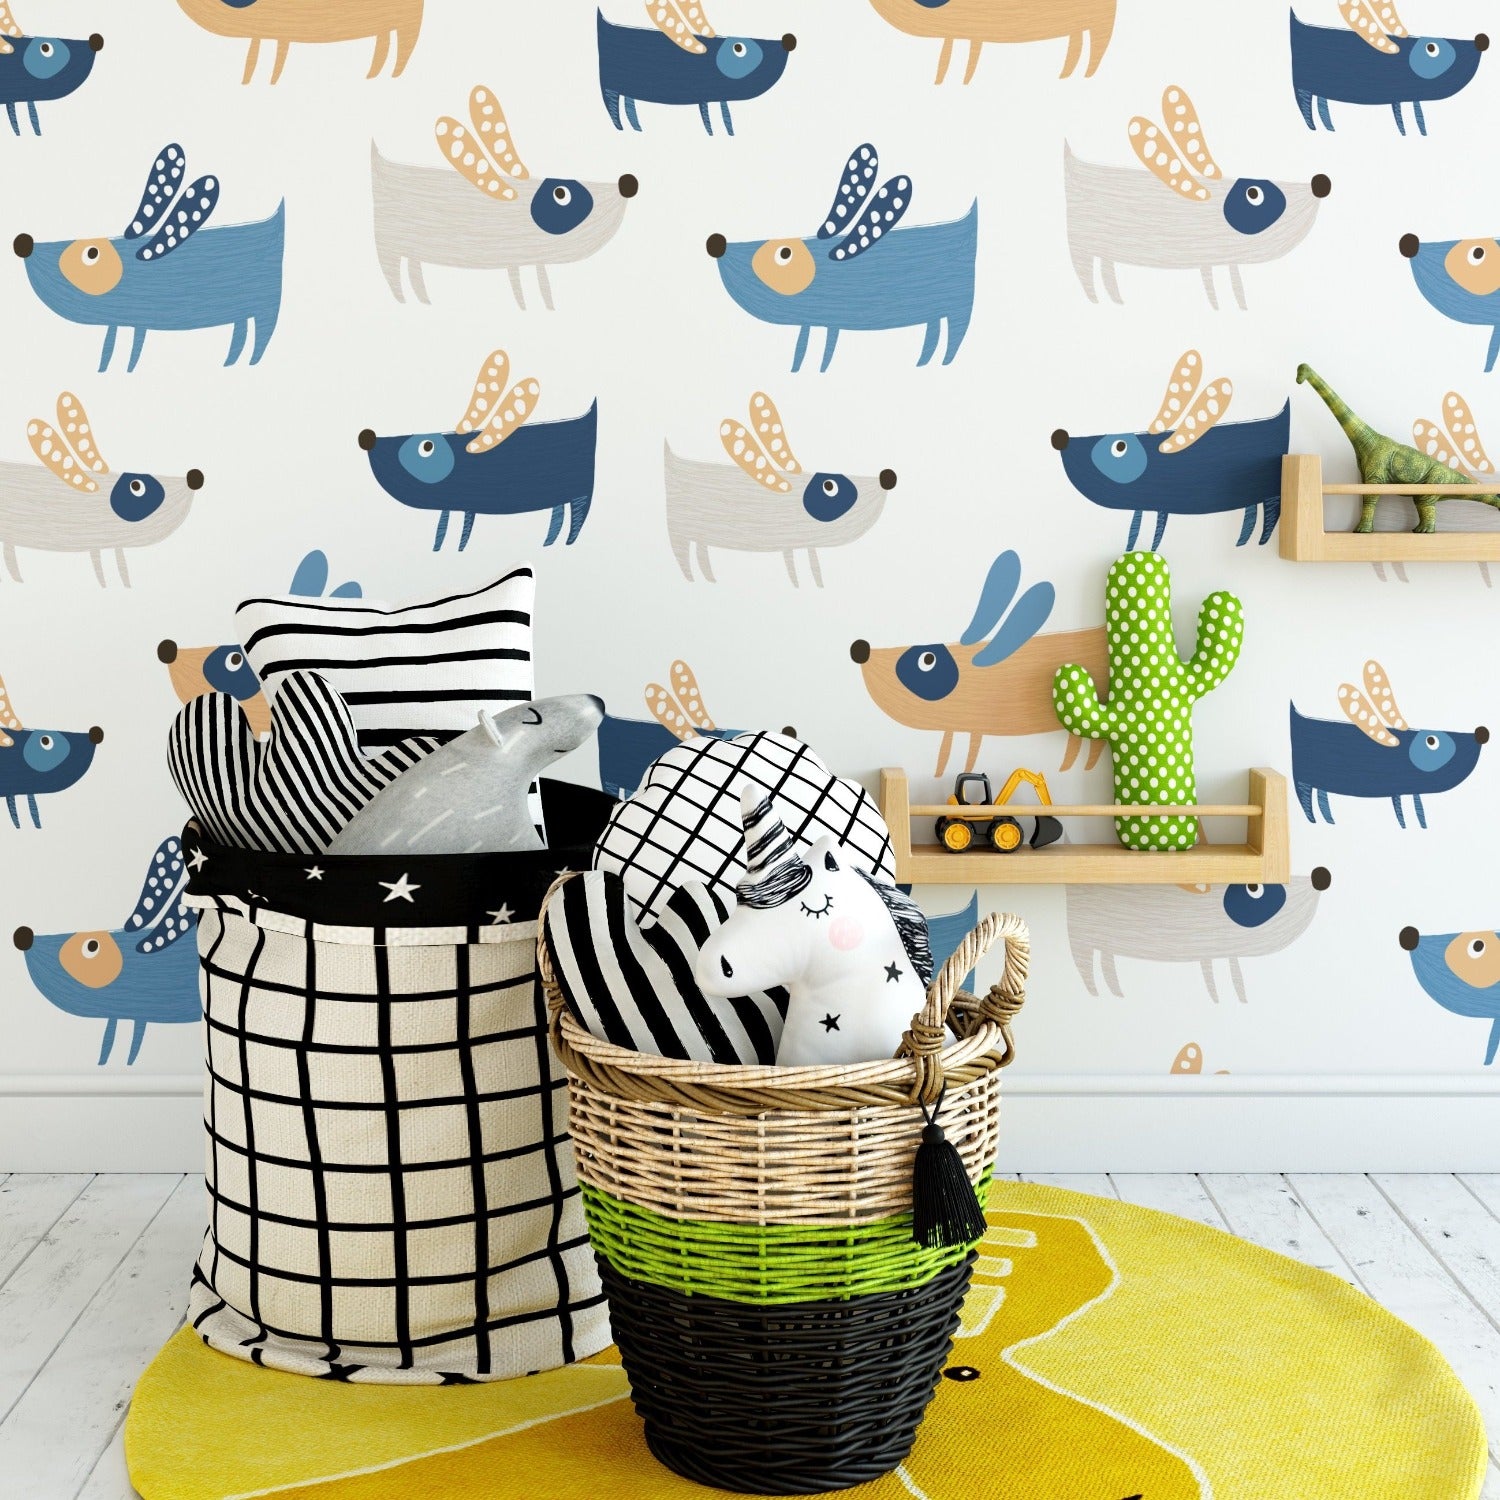 Children's room decor with flying dogs wallpaper featuring playful dog illustrations on a white background